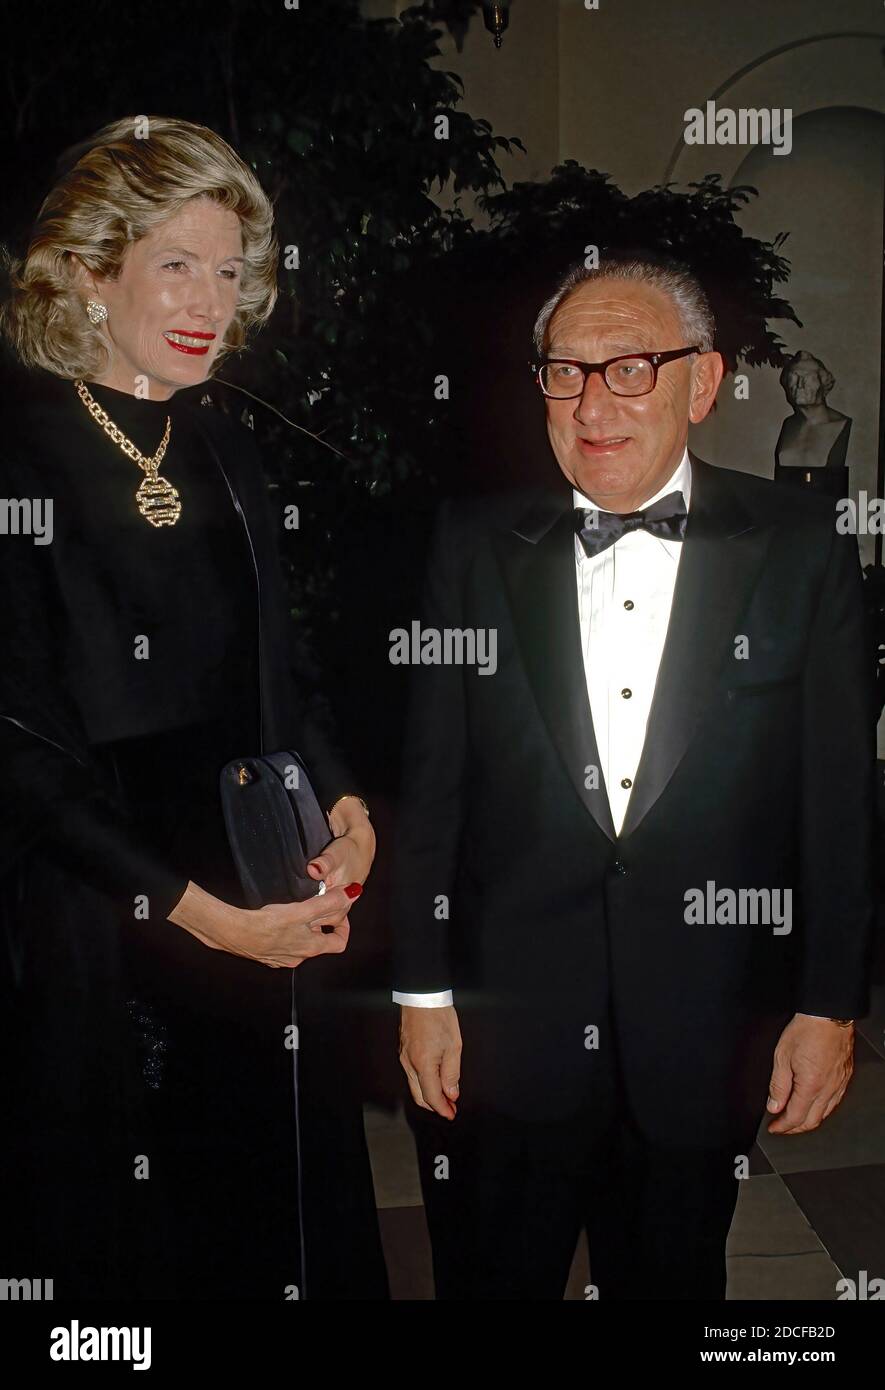 Washington DC, USA, November 16, 1988Former Secretary of State Henry Kissinger and his wife Nancy arrive at the White House to attend the State Dinner in honor of Prime Minister Margaret Thatcher Credit: Mark Reinstein/MediaPunch Stock Photo